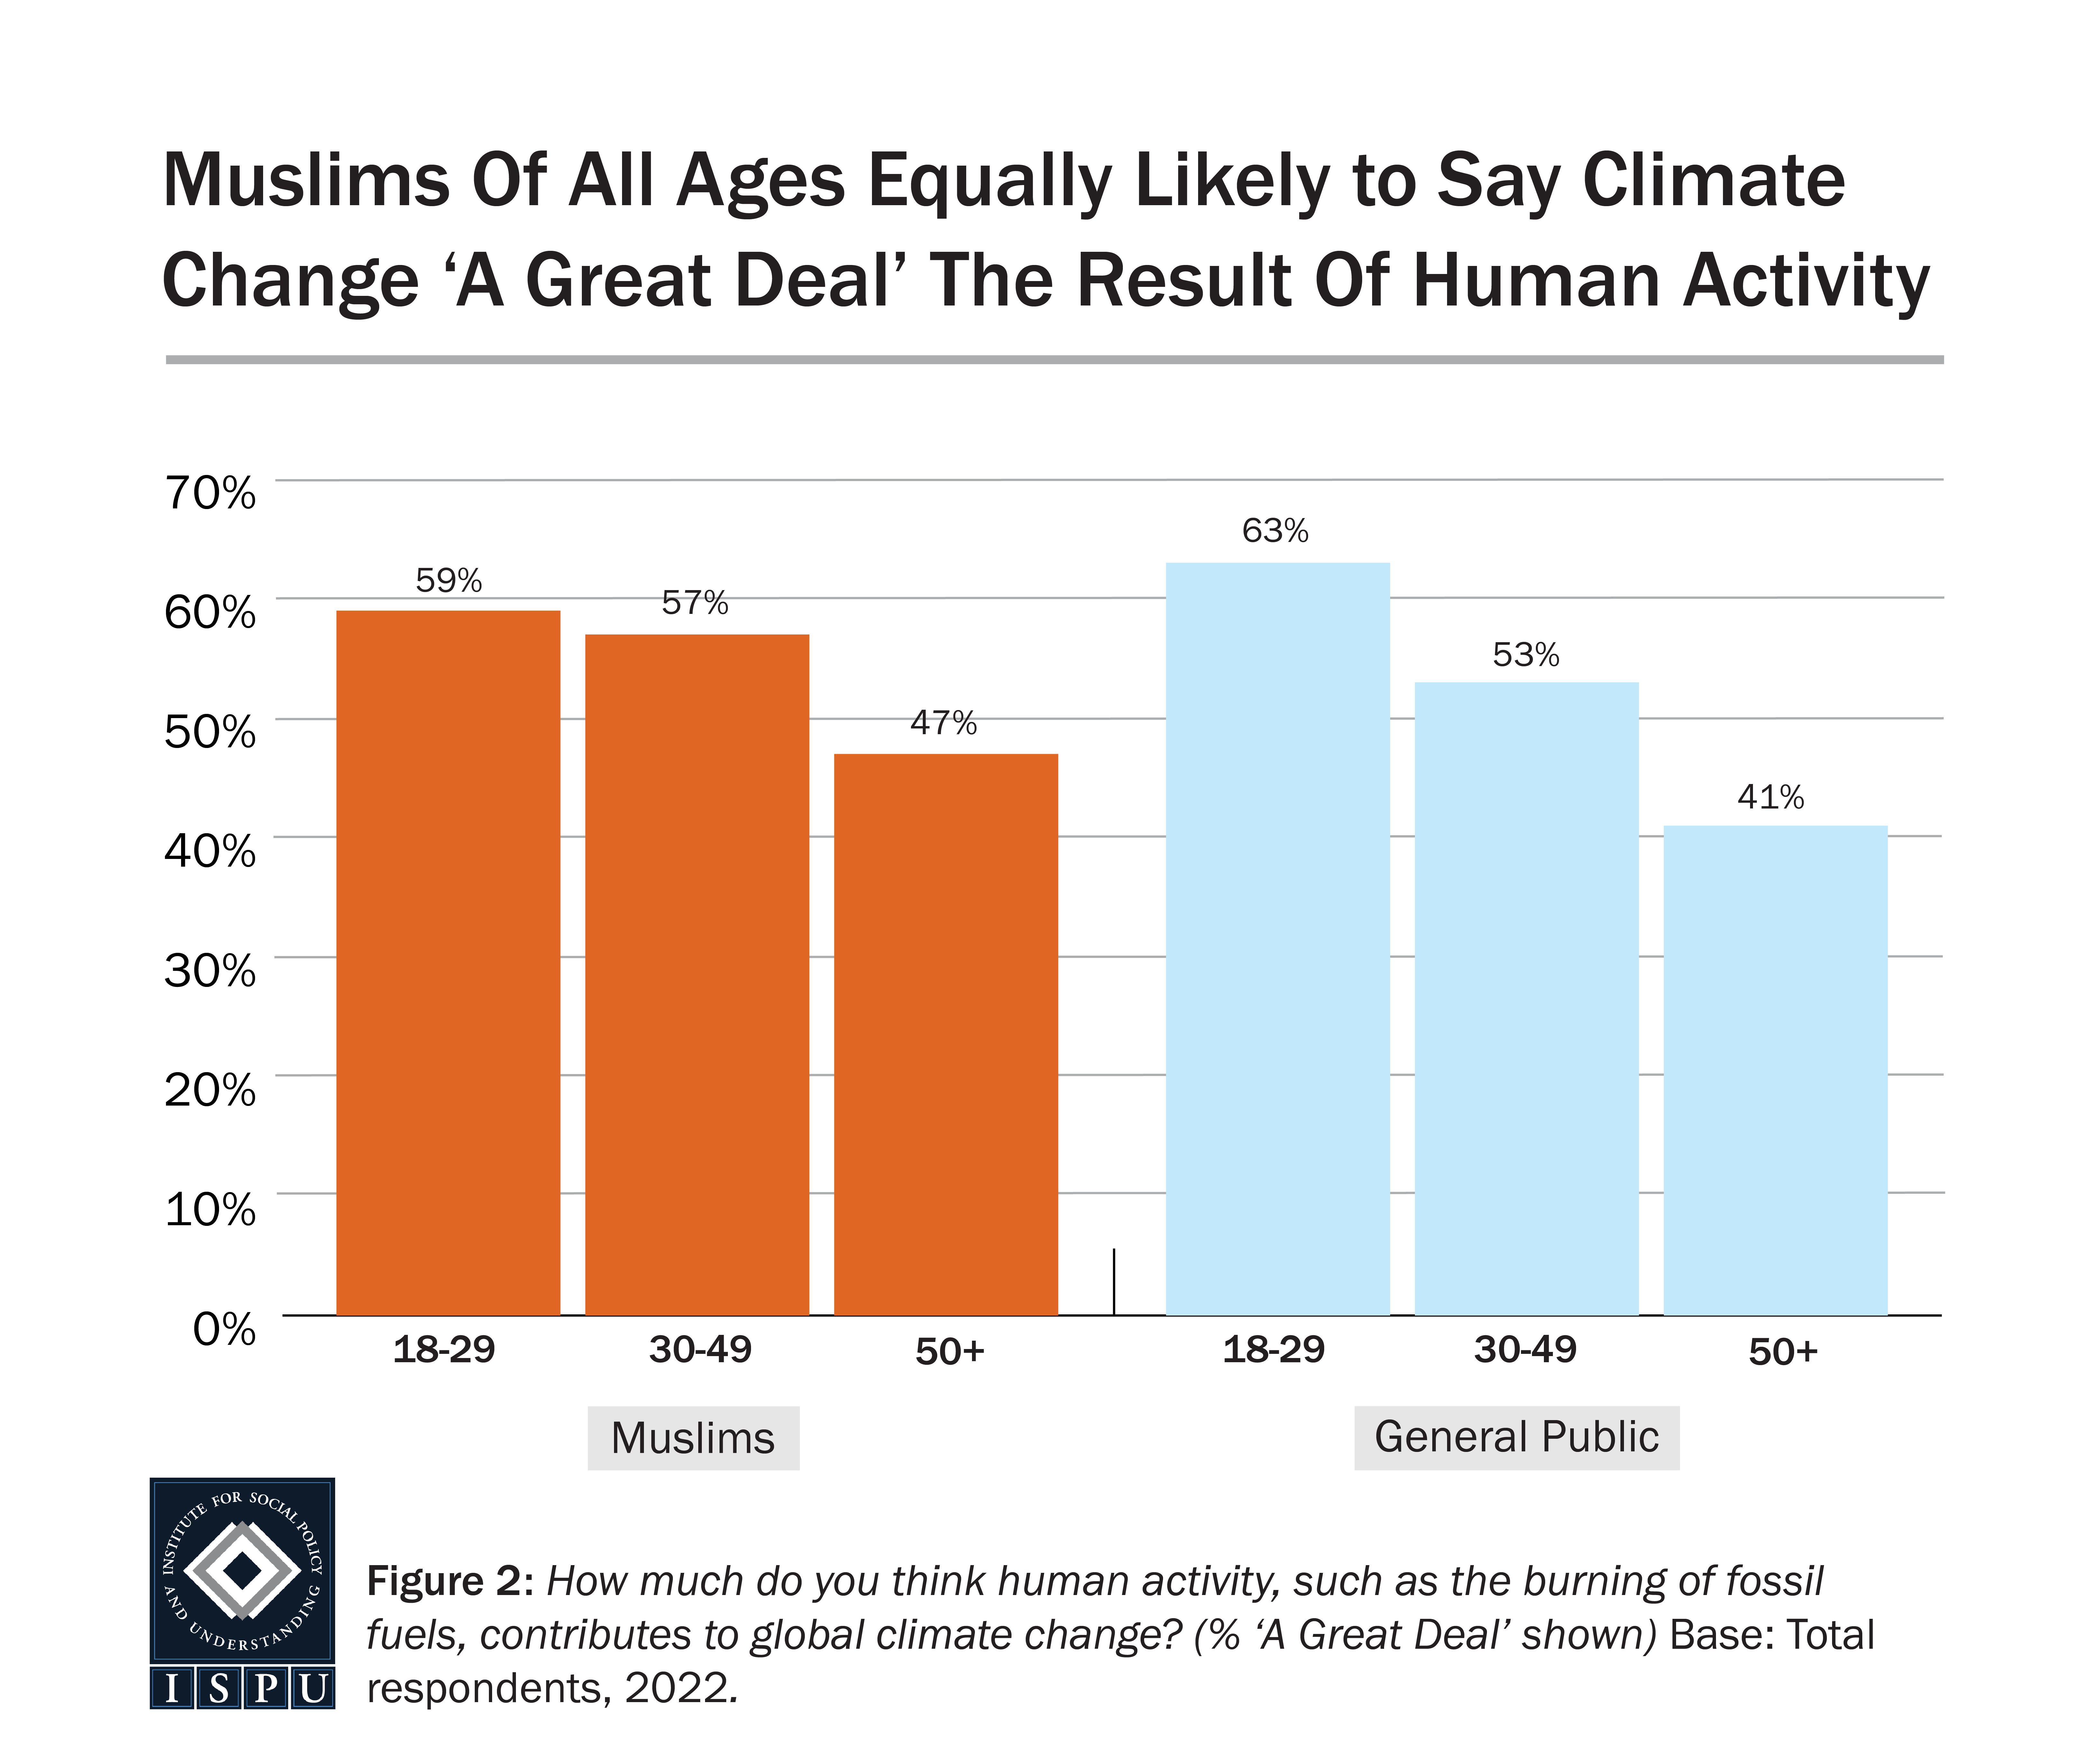 A bar graph showing the proportion of different age groups among Muslims and the general public all who attribute climate change “a great deal” to human activity.